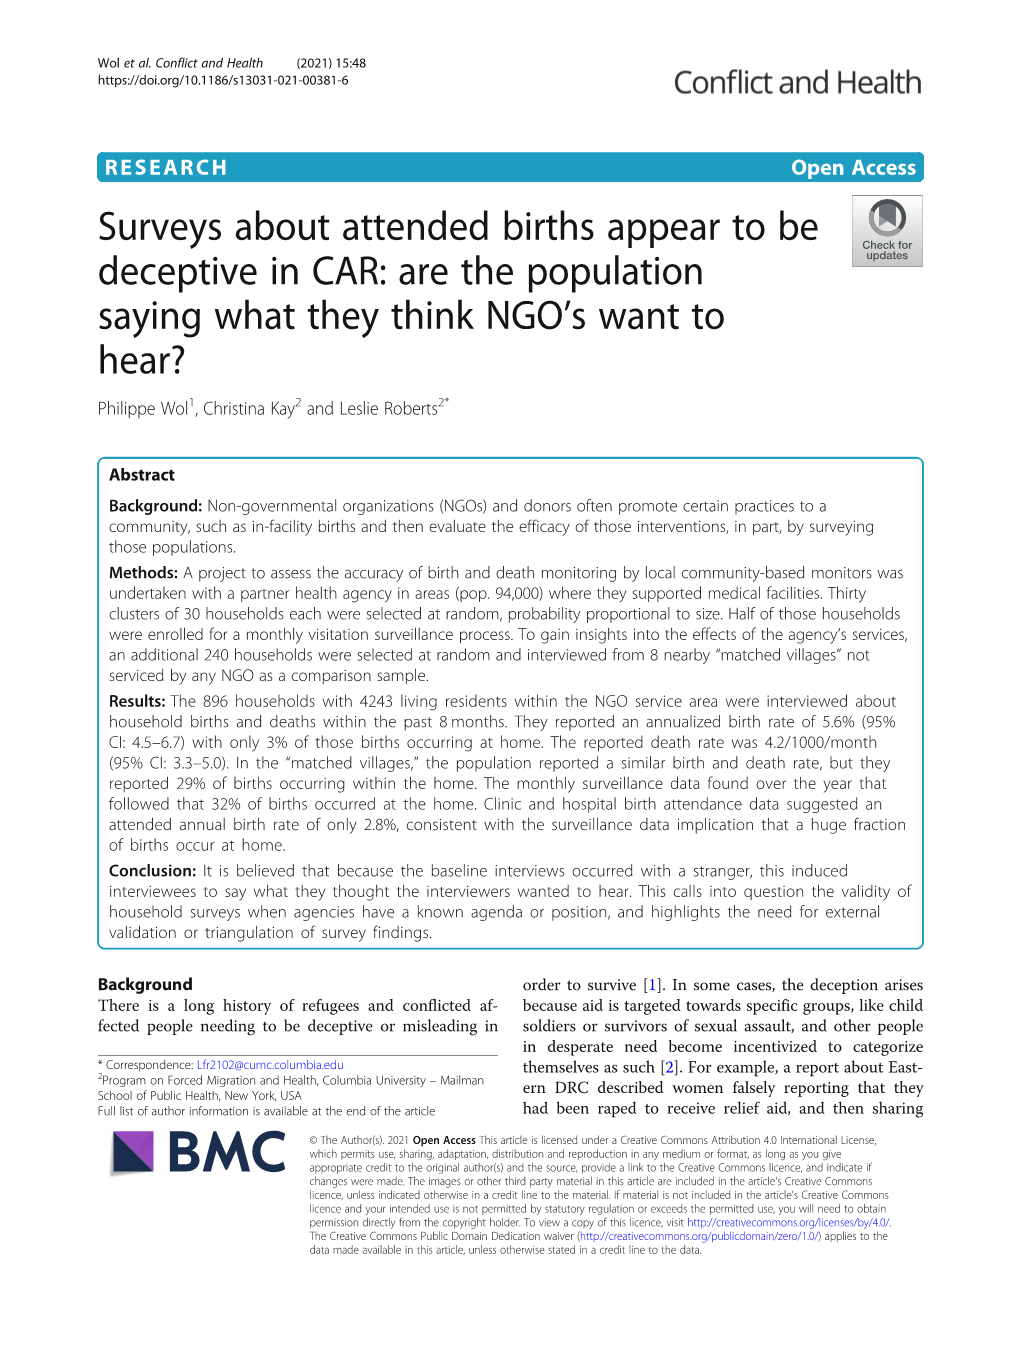 Surveys About Attended Births Appear to Be Deceptive In